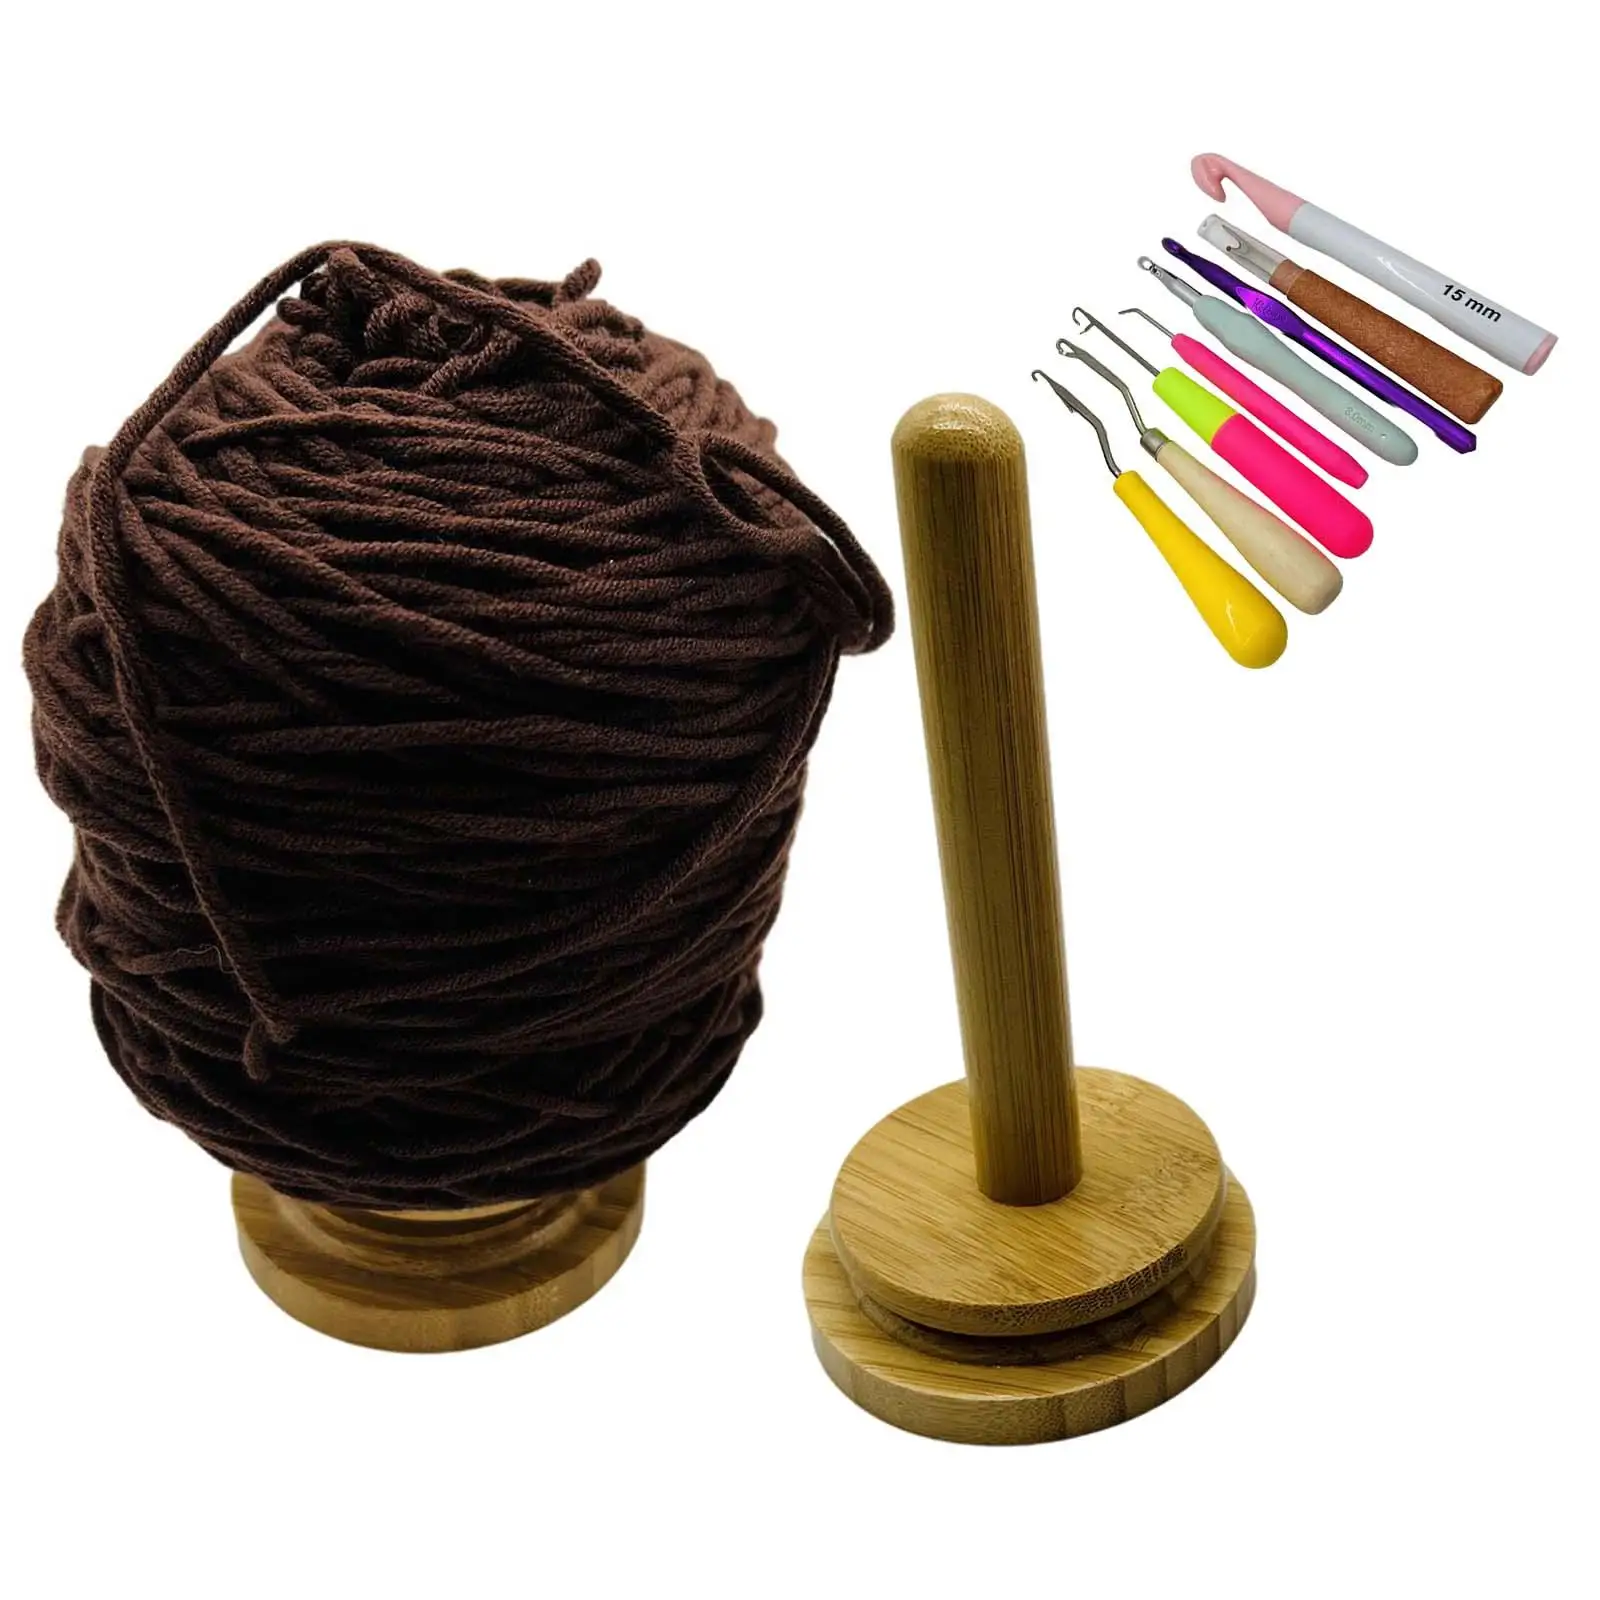 Yarn Ball Holder with 8 Crochet Hooks Yarn Rolling Holder for Ribbon Adults Sewing Prevent Yarn Tangling, Winding Crafts Lover